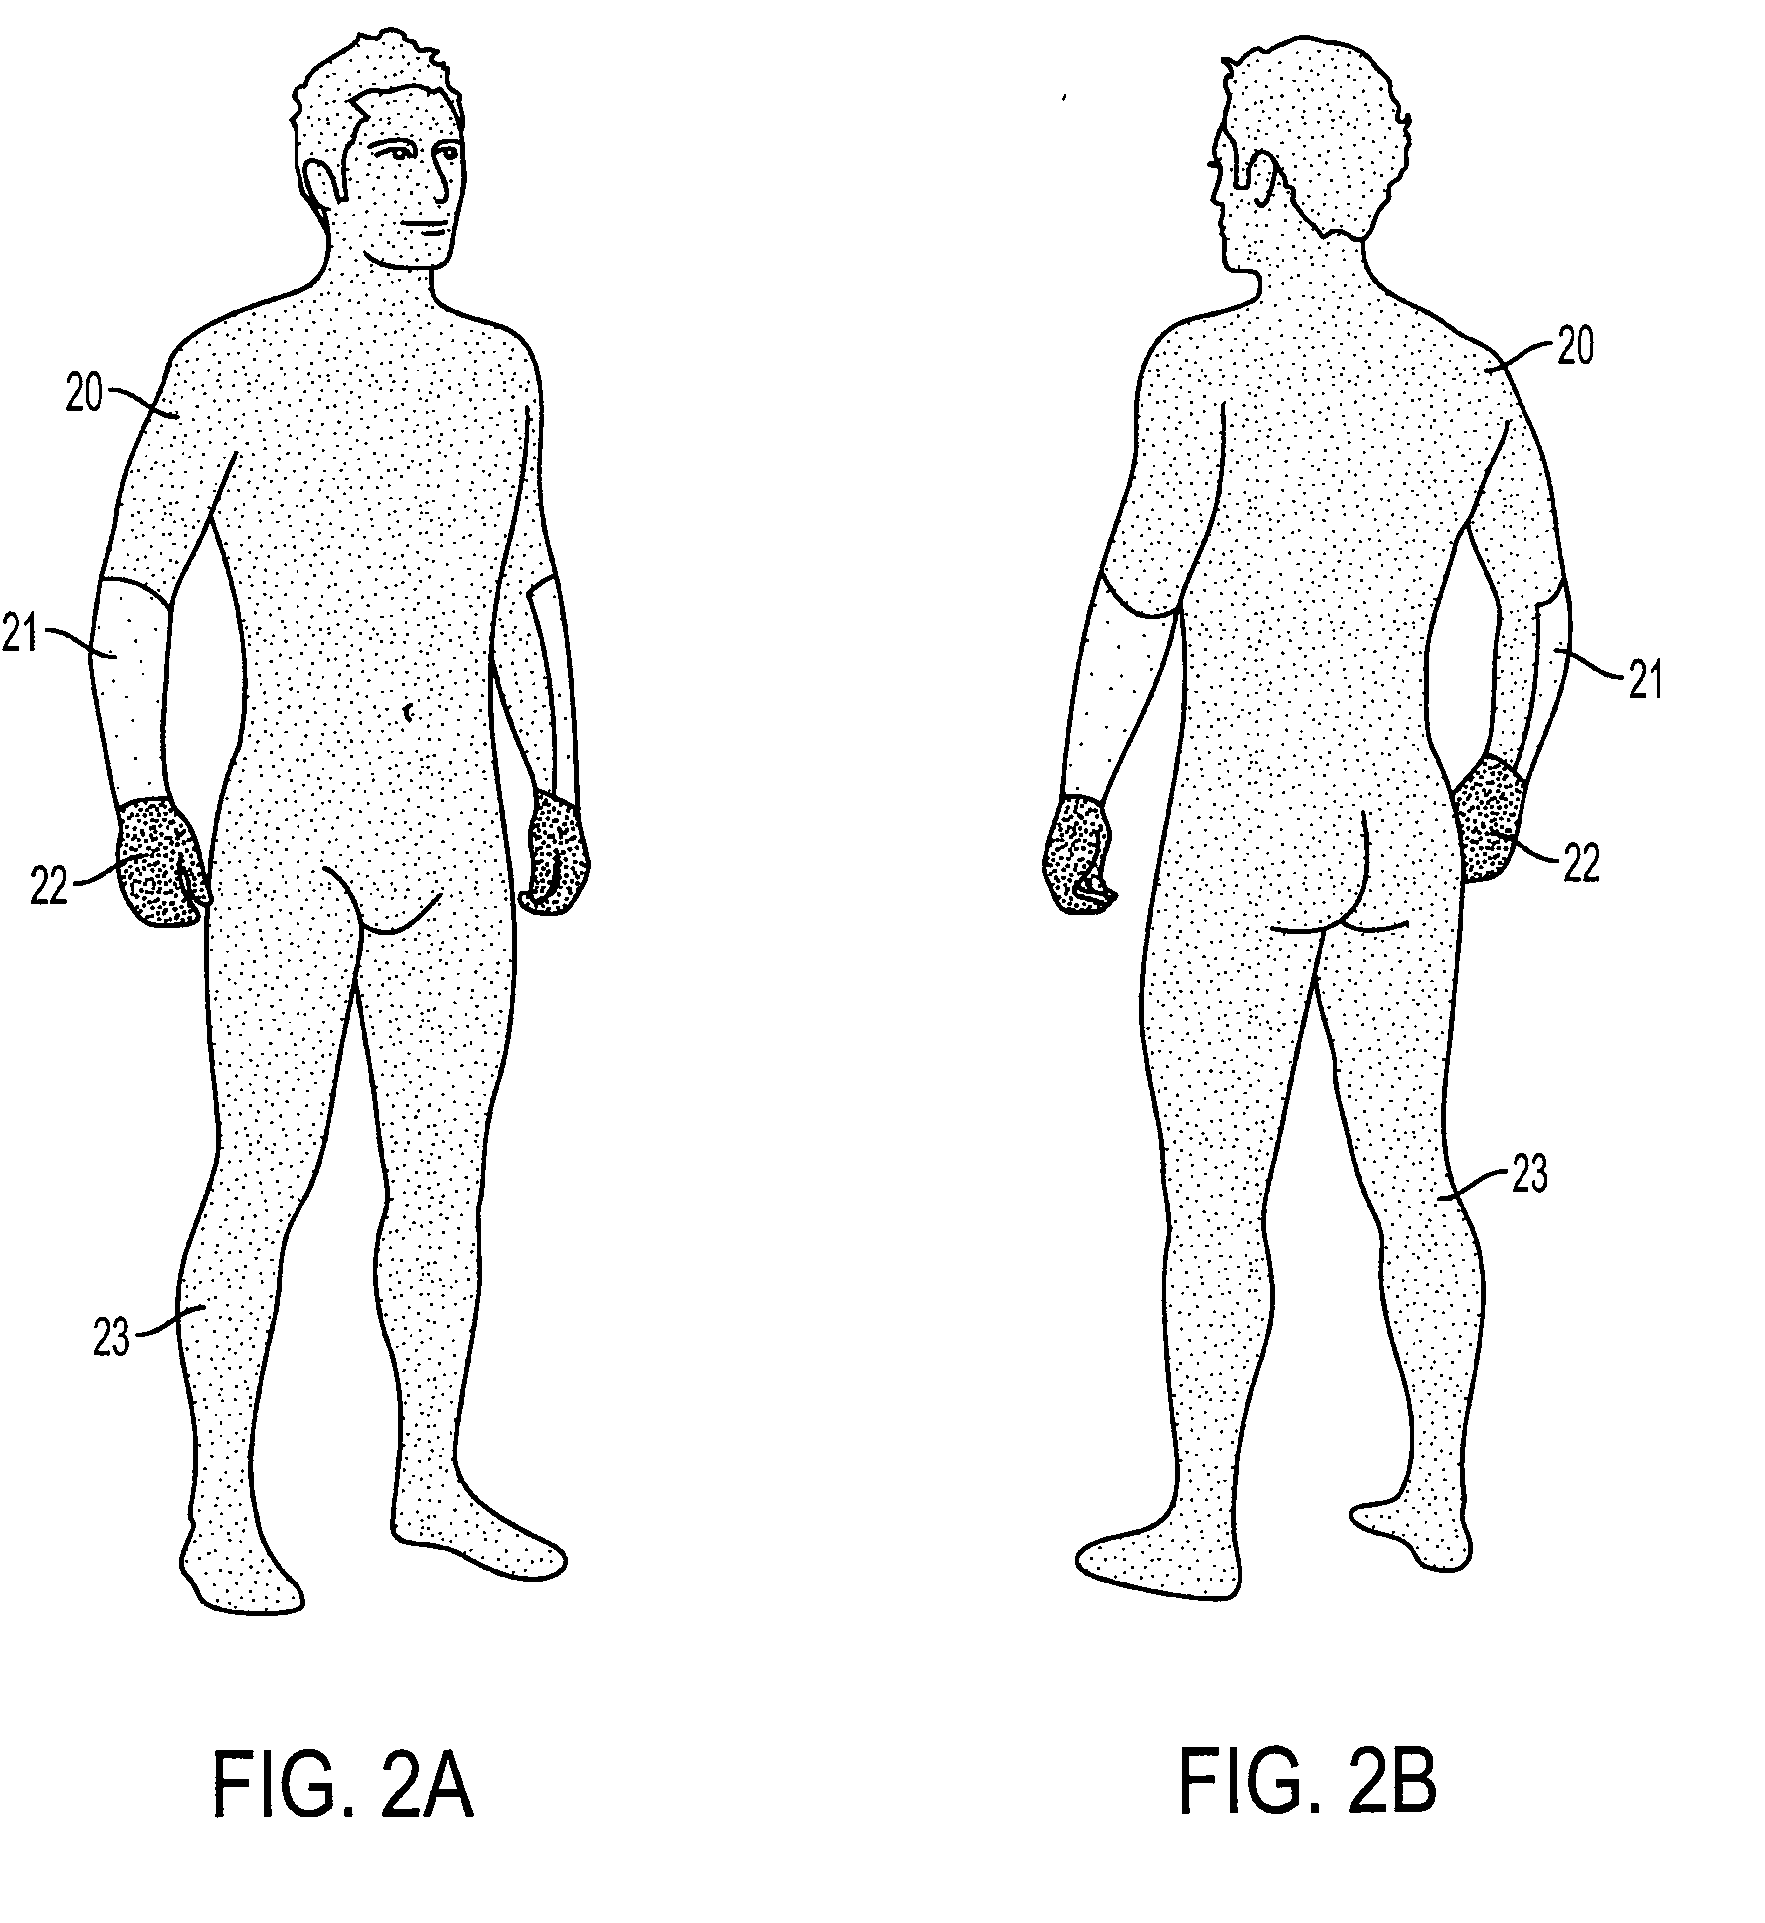 Articles Of Base Layer Apparel Including Zones Having Different Thermal Properties